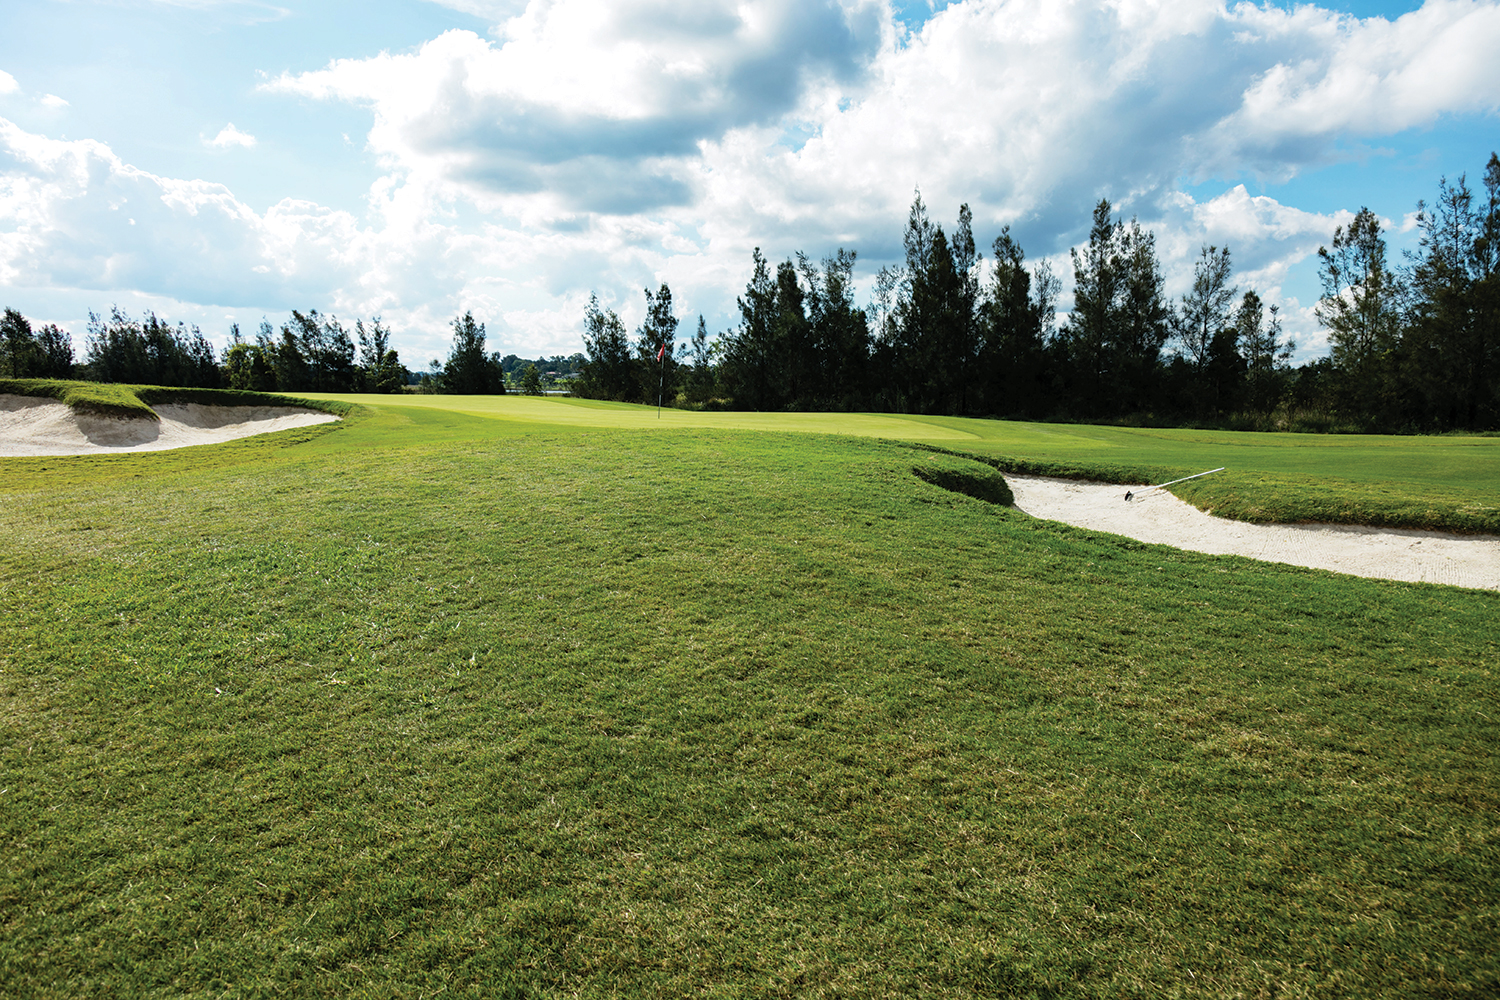 The bunkering is a feature, often drawing golfers’ eyes more than the other hazards.